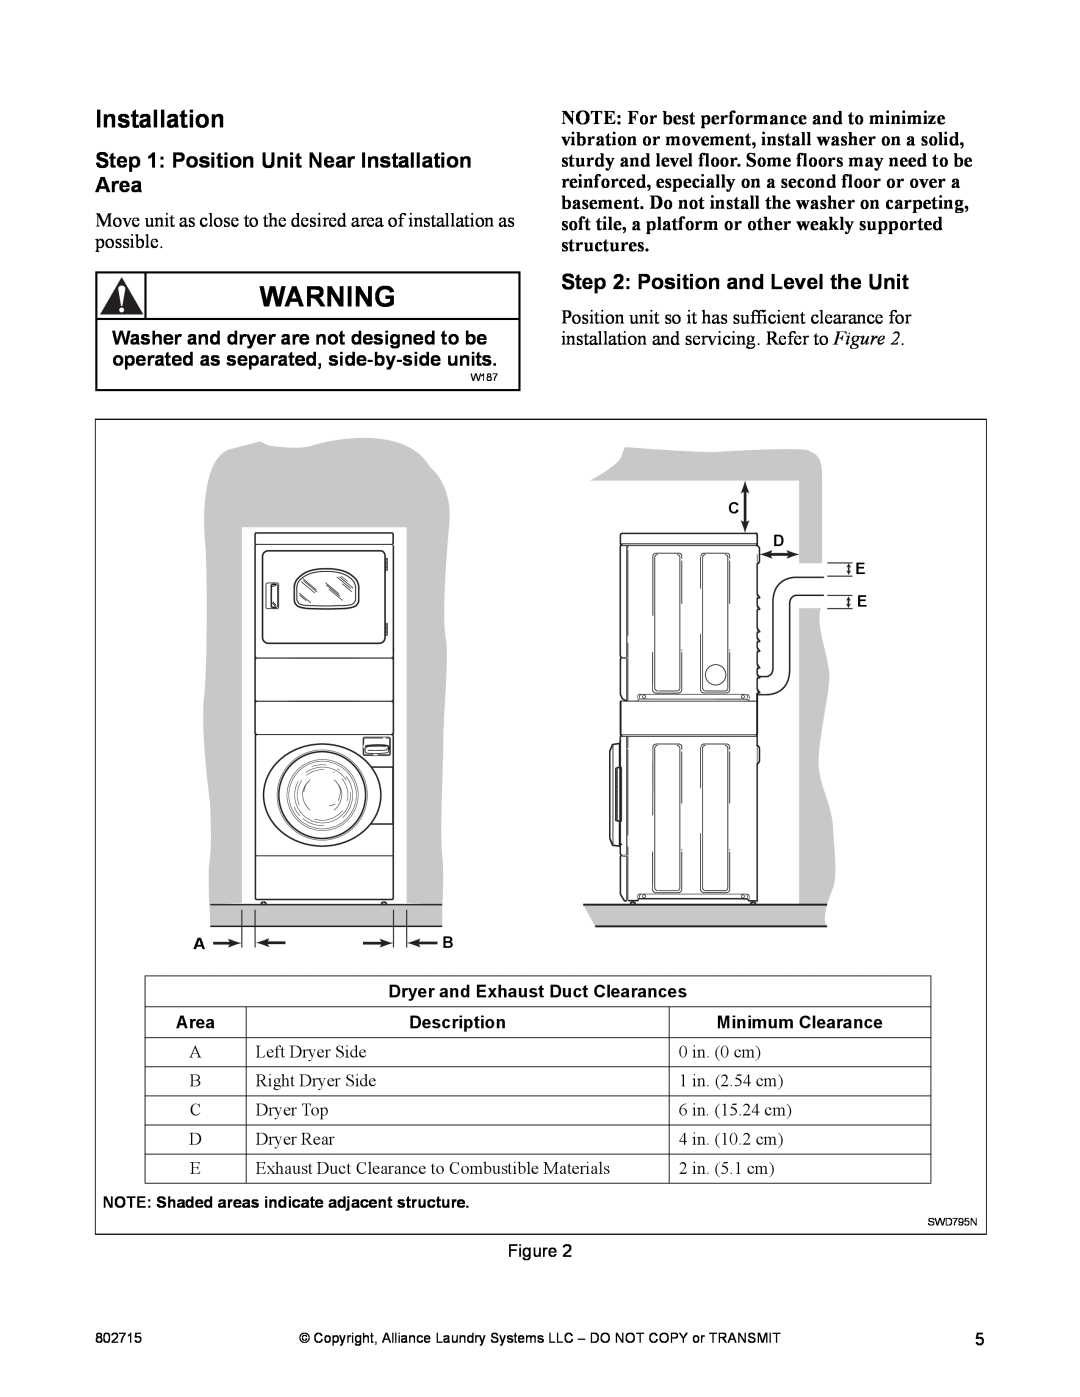 Alliance Laundry Systems Dishwasher manual Position Unit Near Installation Area, Position and Level the Unit 